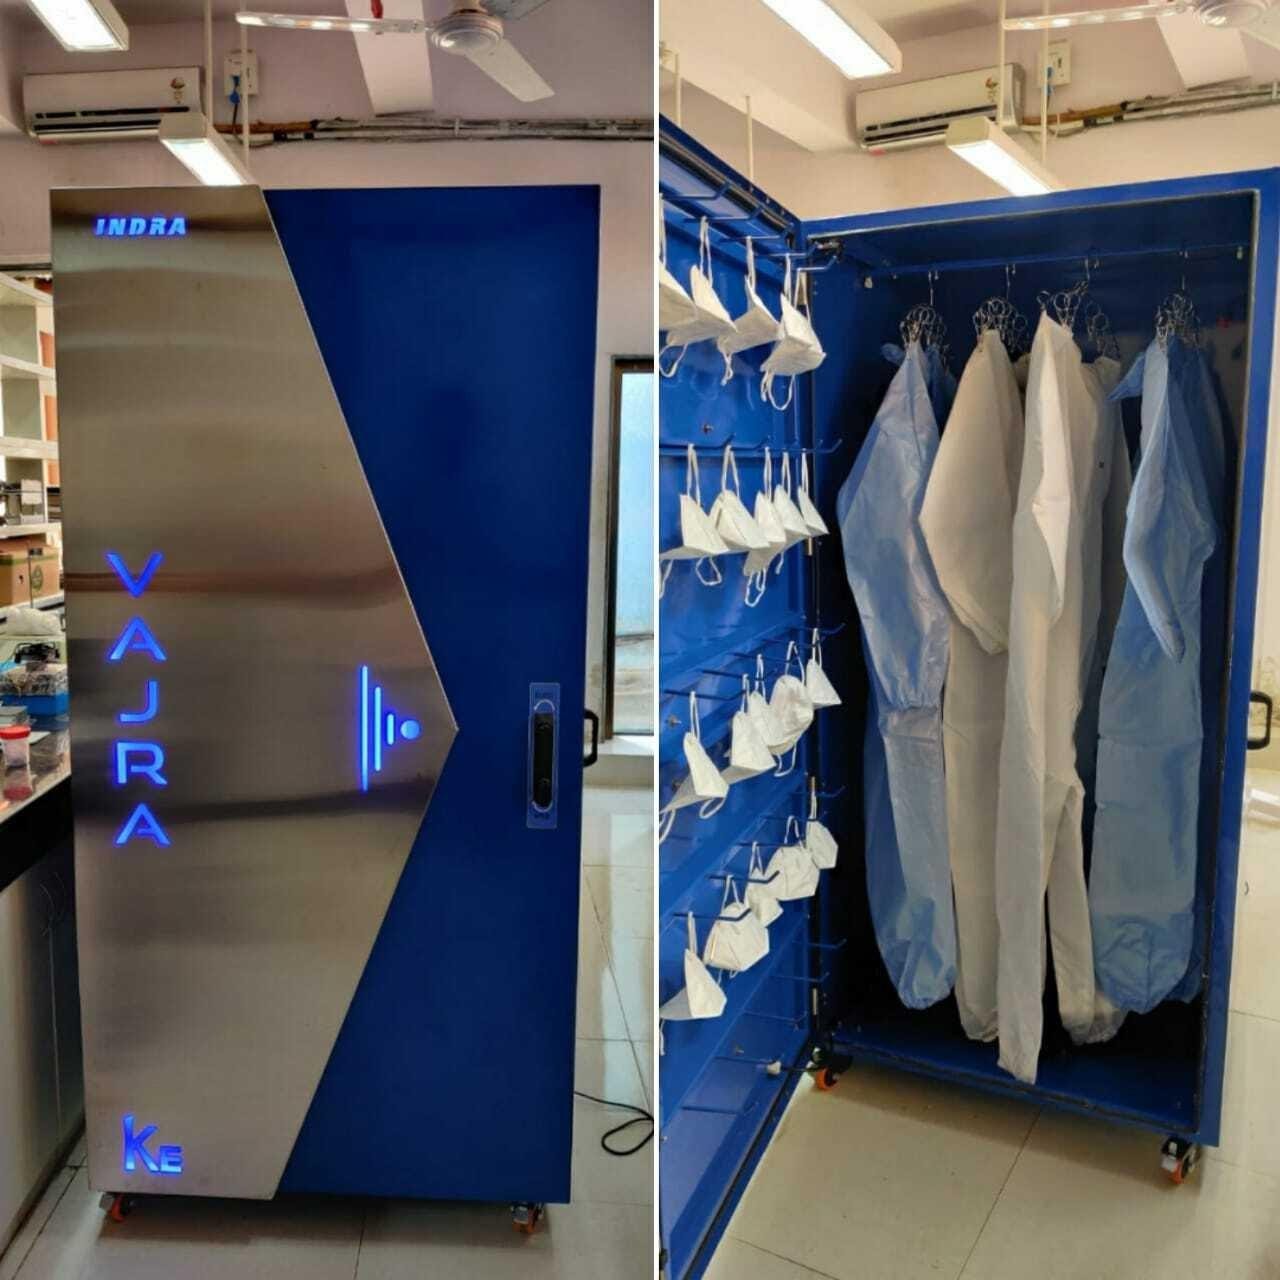 Mumbai start-up designs device to help hospitals disinfect, reuse COVID gear